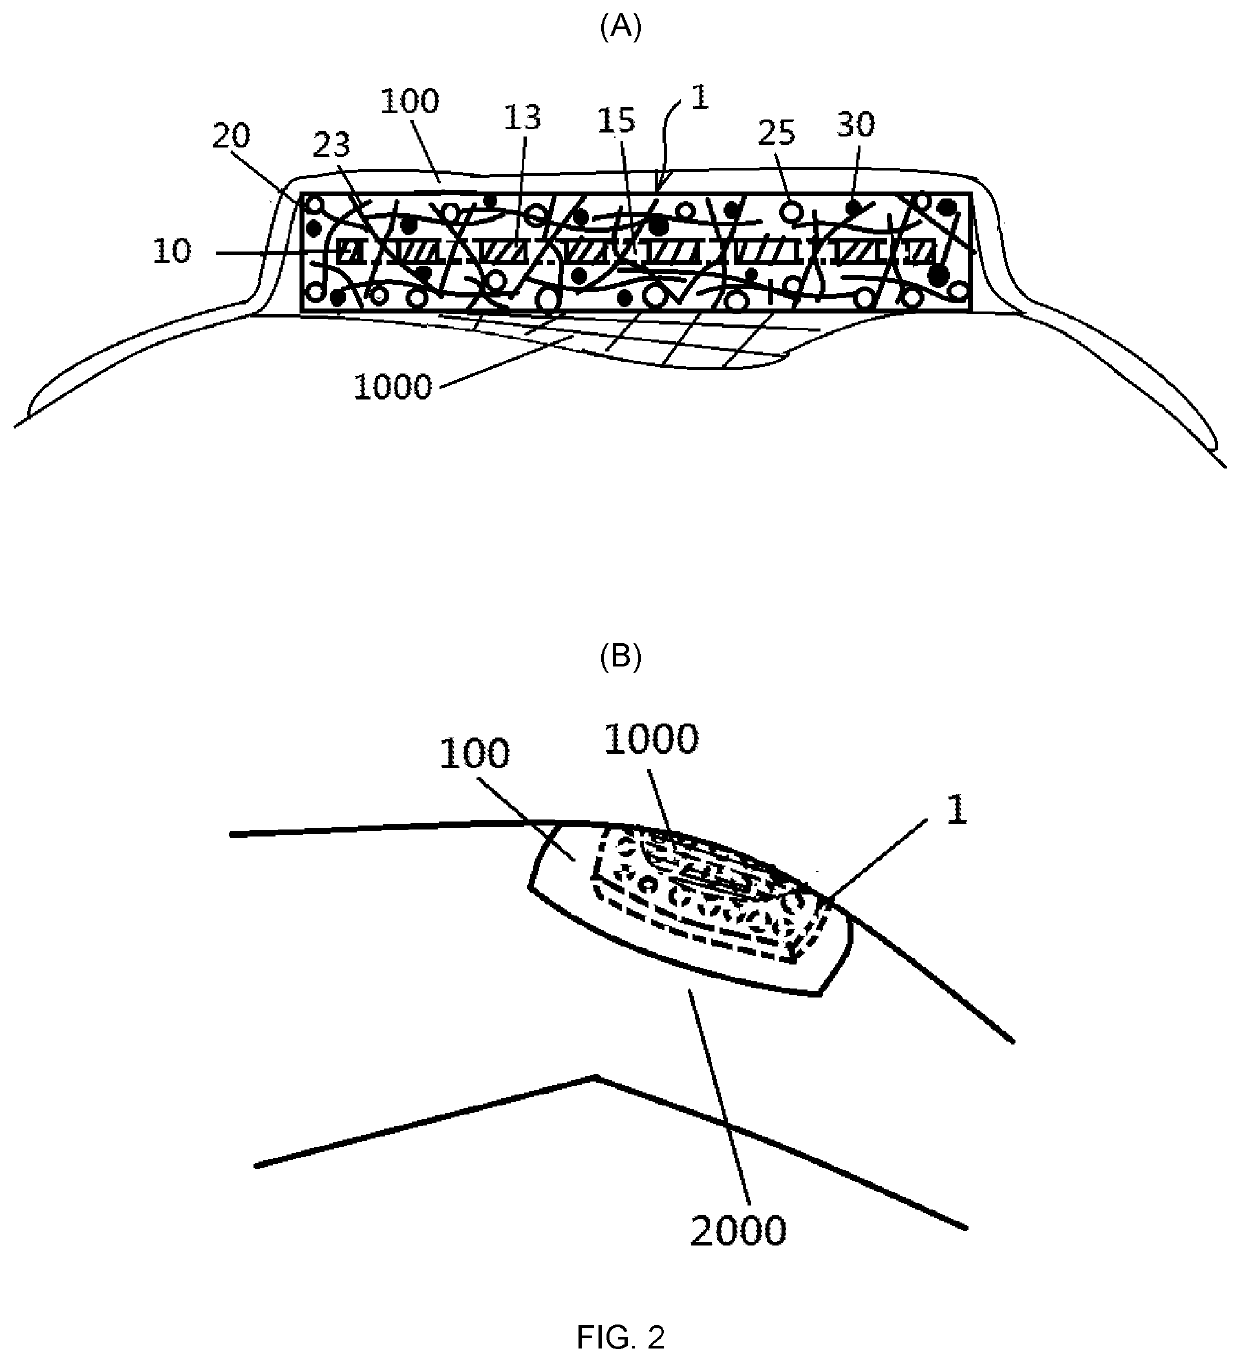 Hydrogel surgical dressing product having a multi-dimensional flexible hydrophilic structure-linkage composite